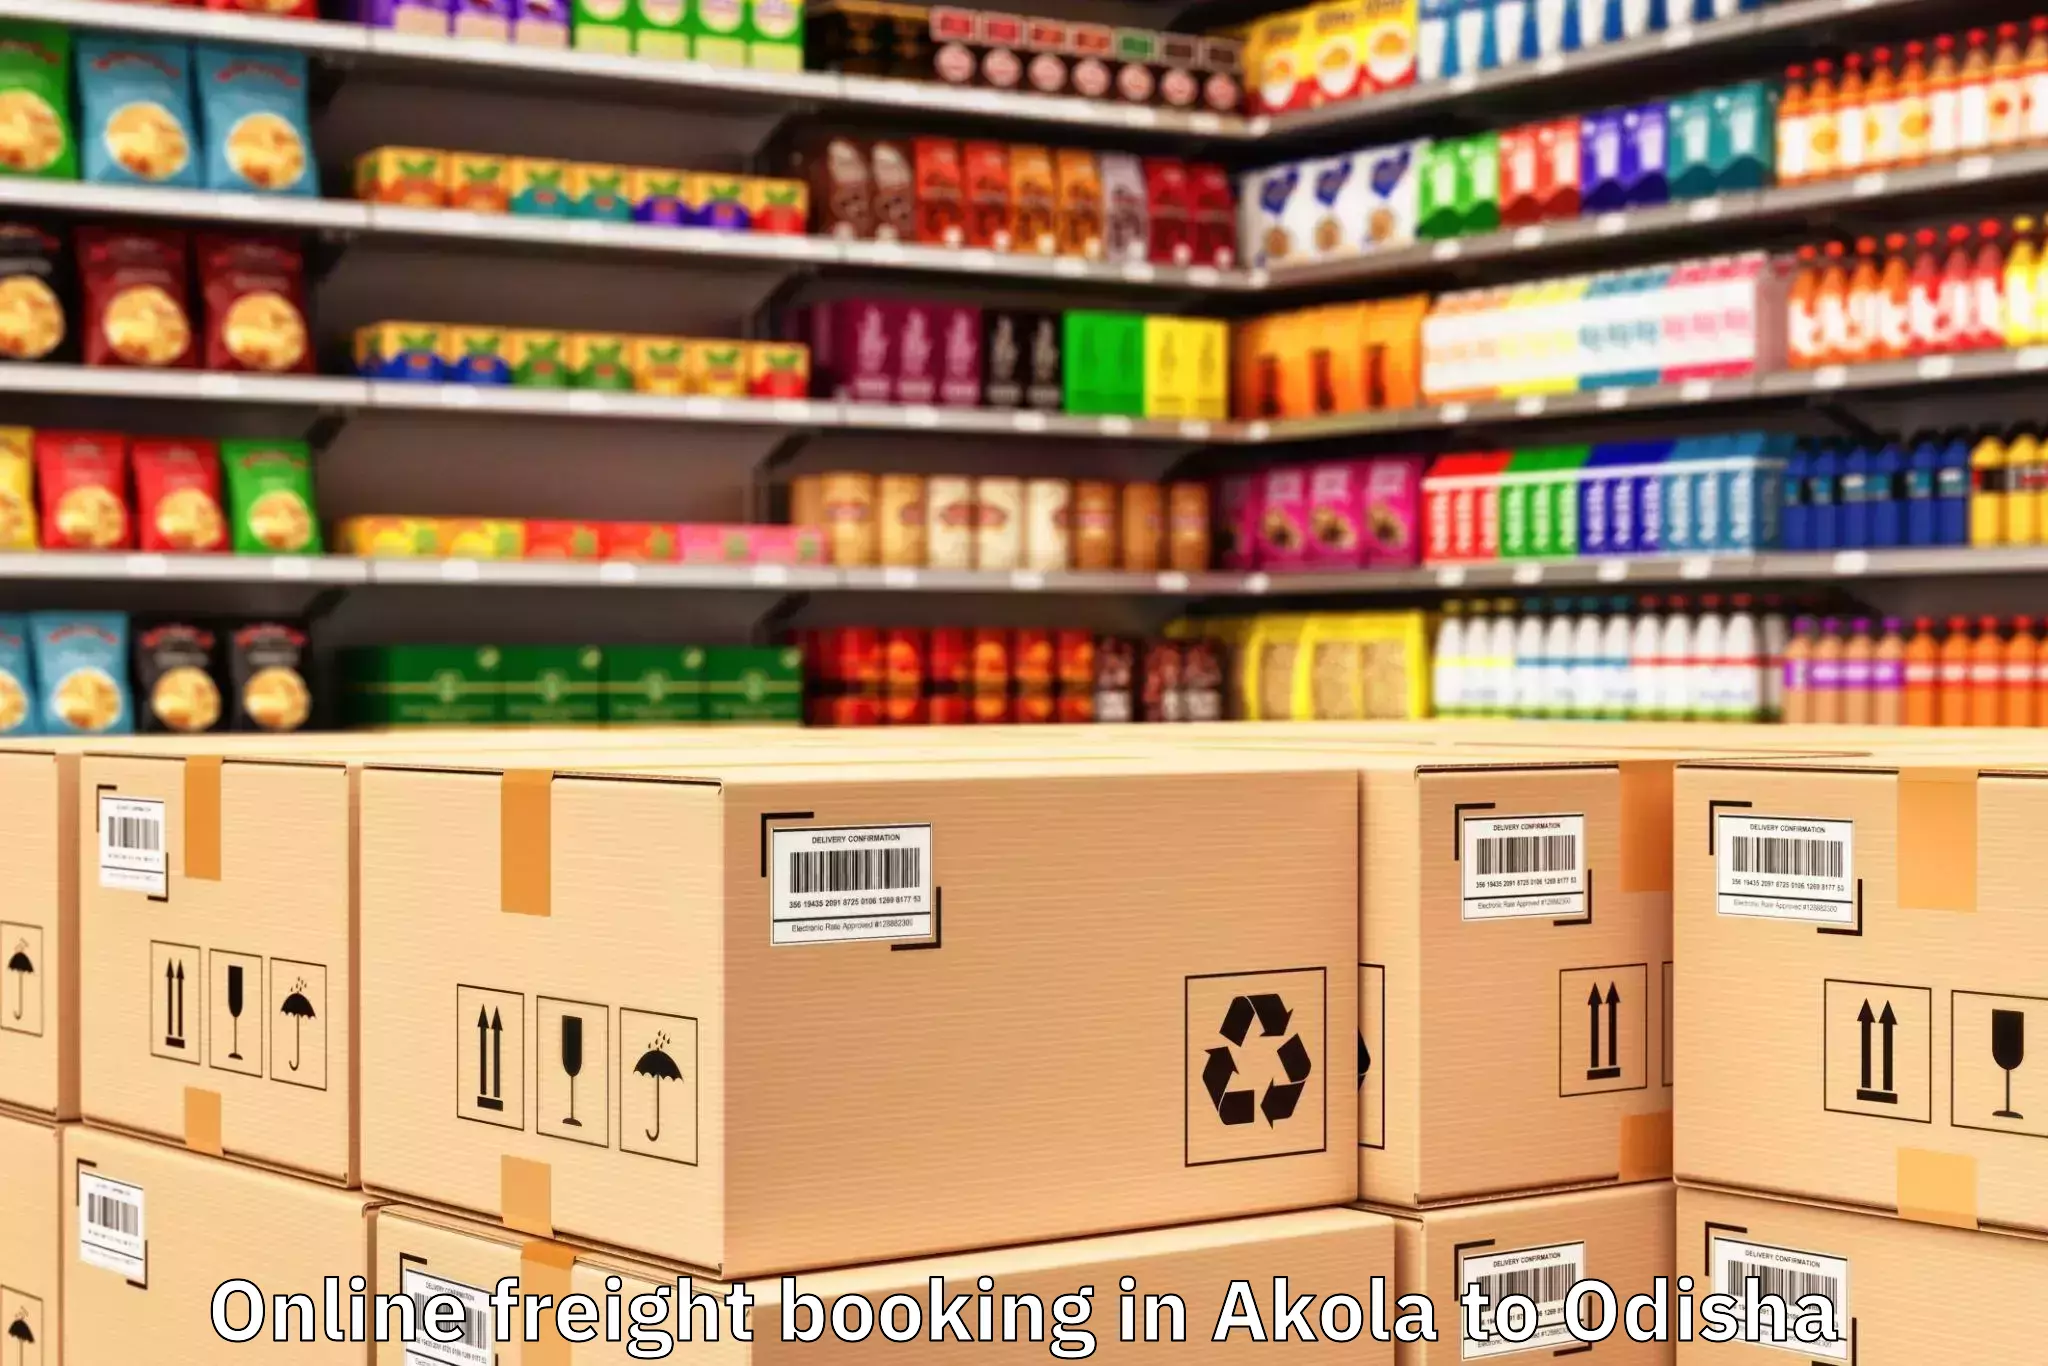 Akola to Champua Online Freight Booking Booking